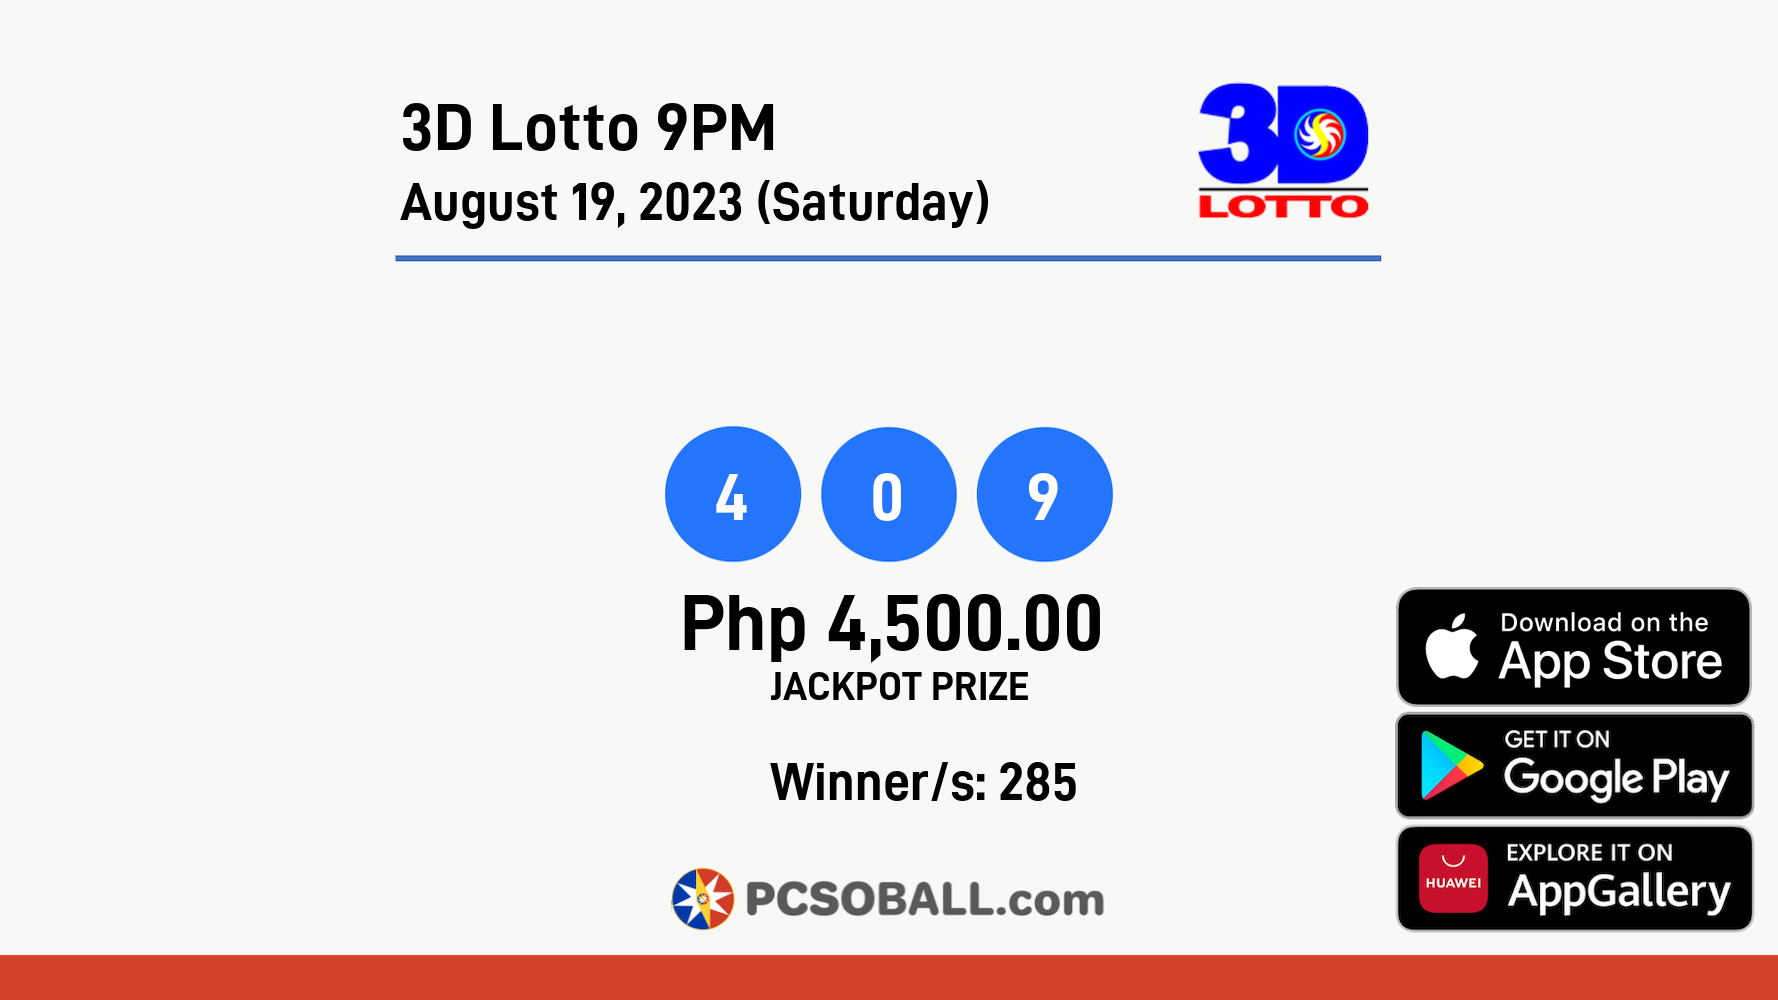 3D Lotto 9PM August 19, 2023 (Saturday) Result